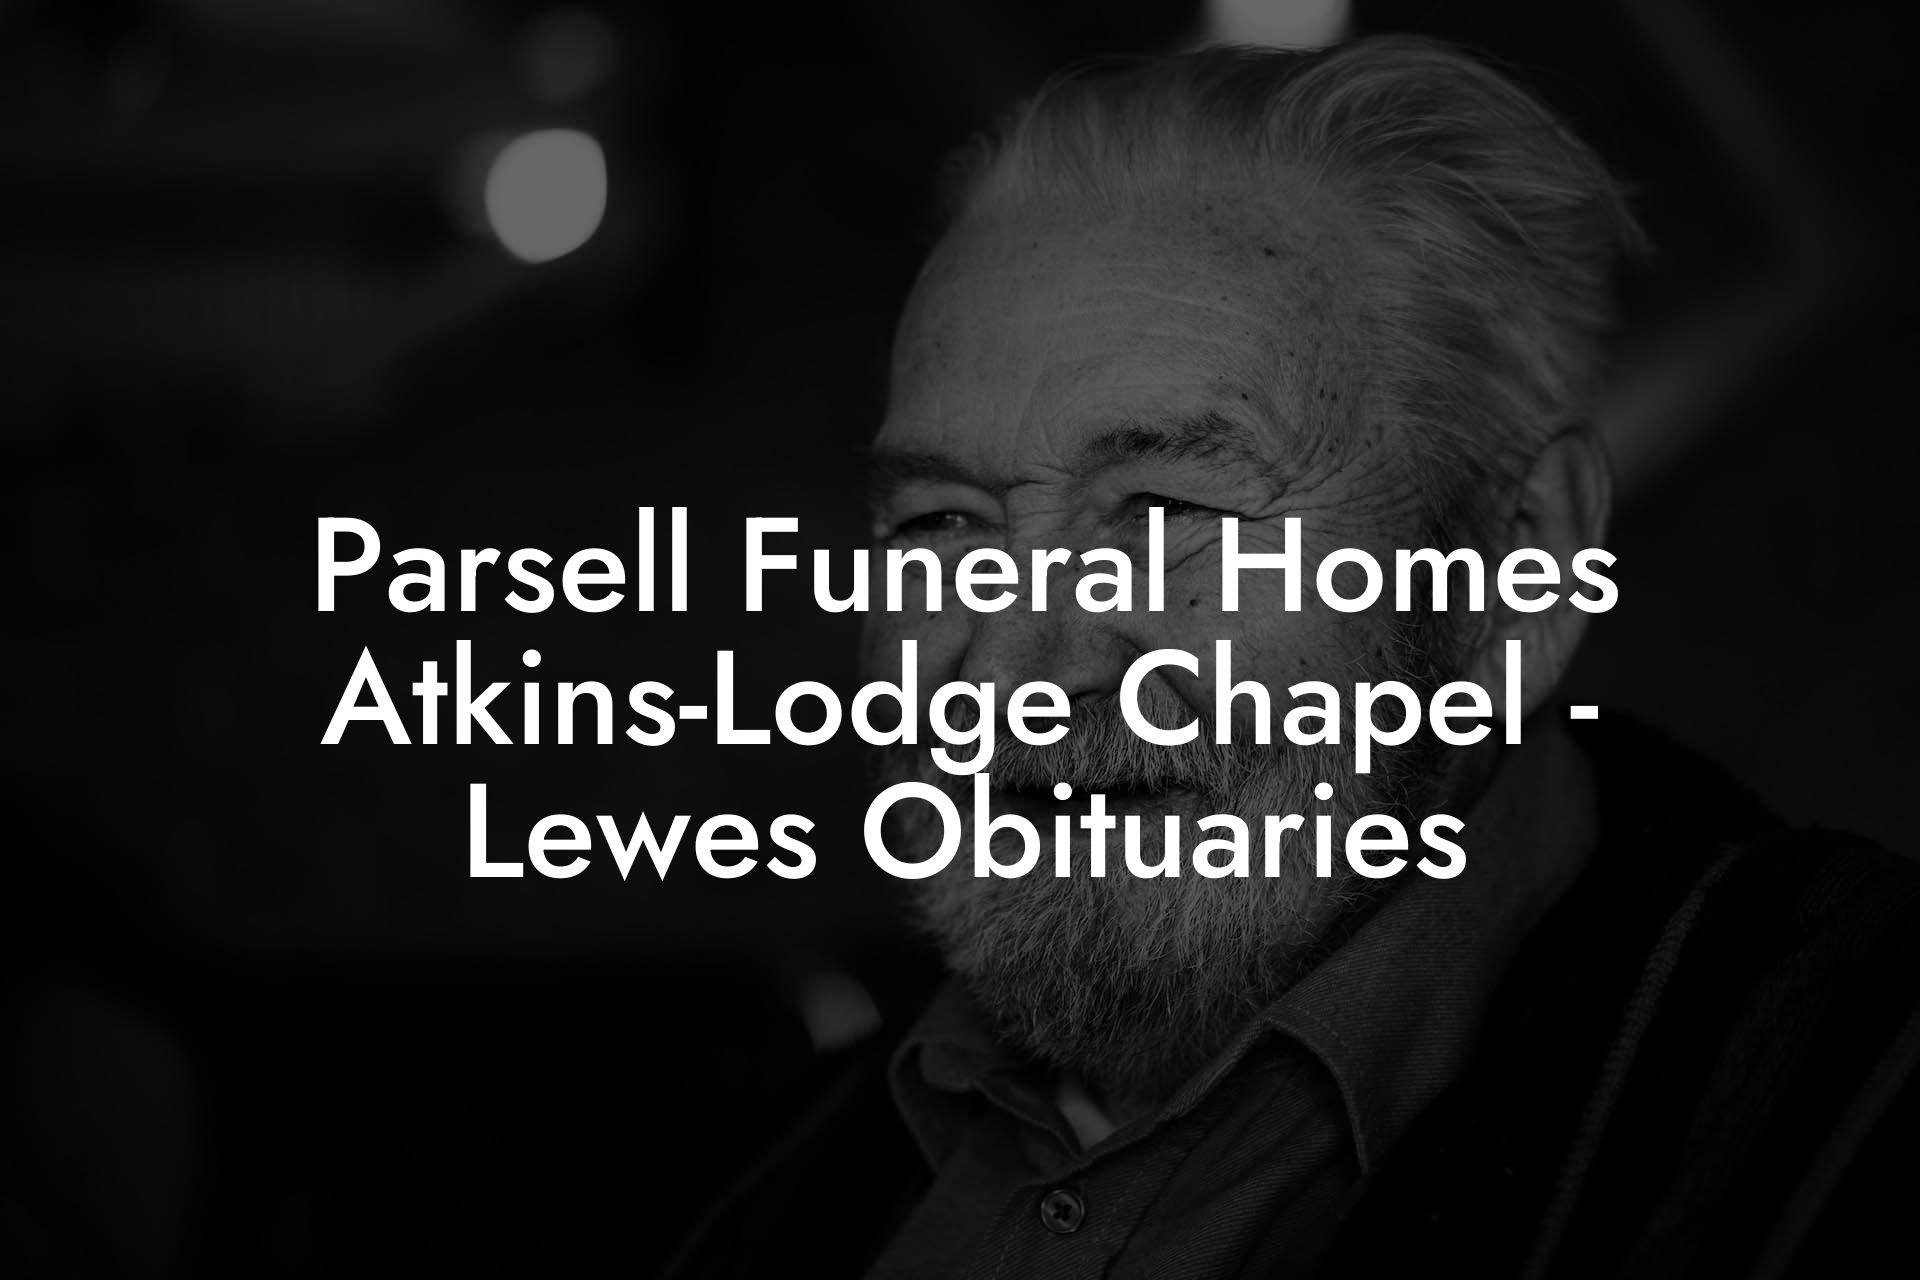 Parsell Funeral Homes Atkins-Lodge Chapel - Lewes Obituaries